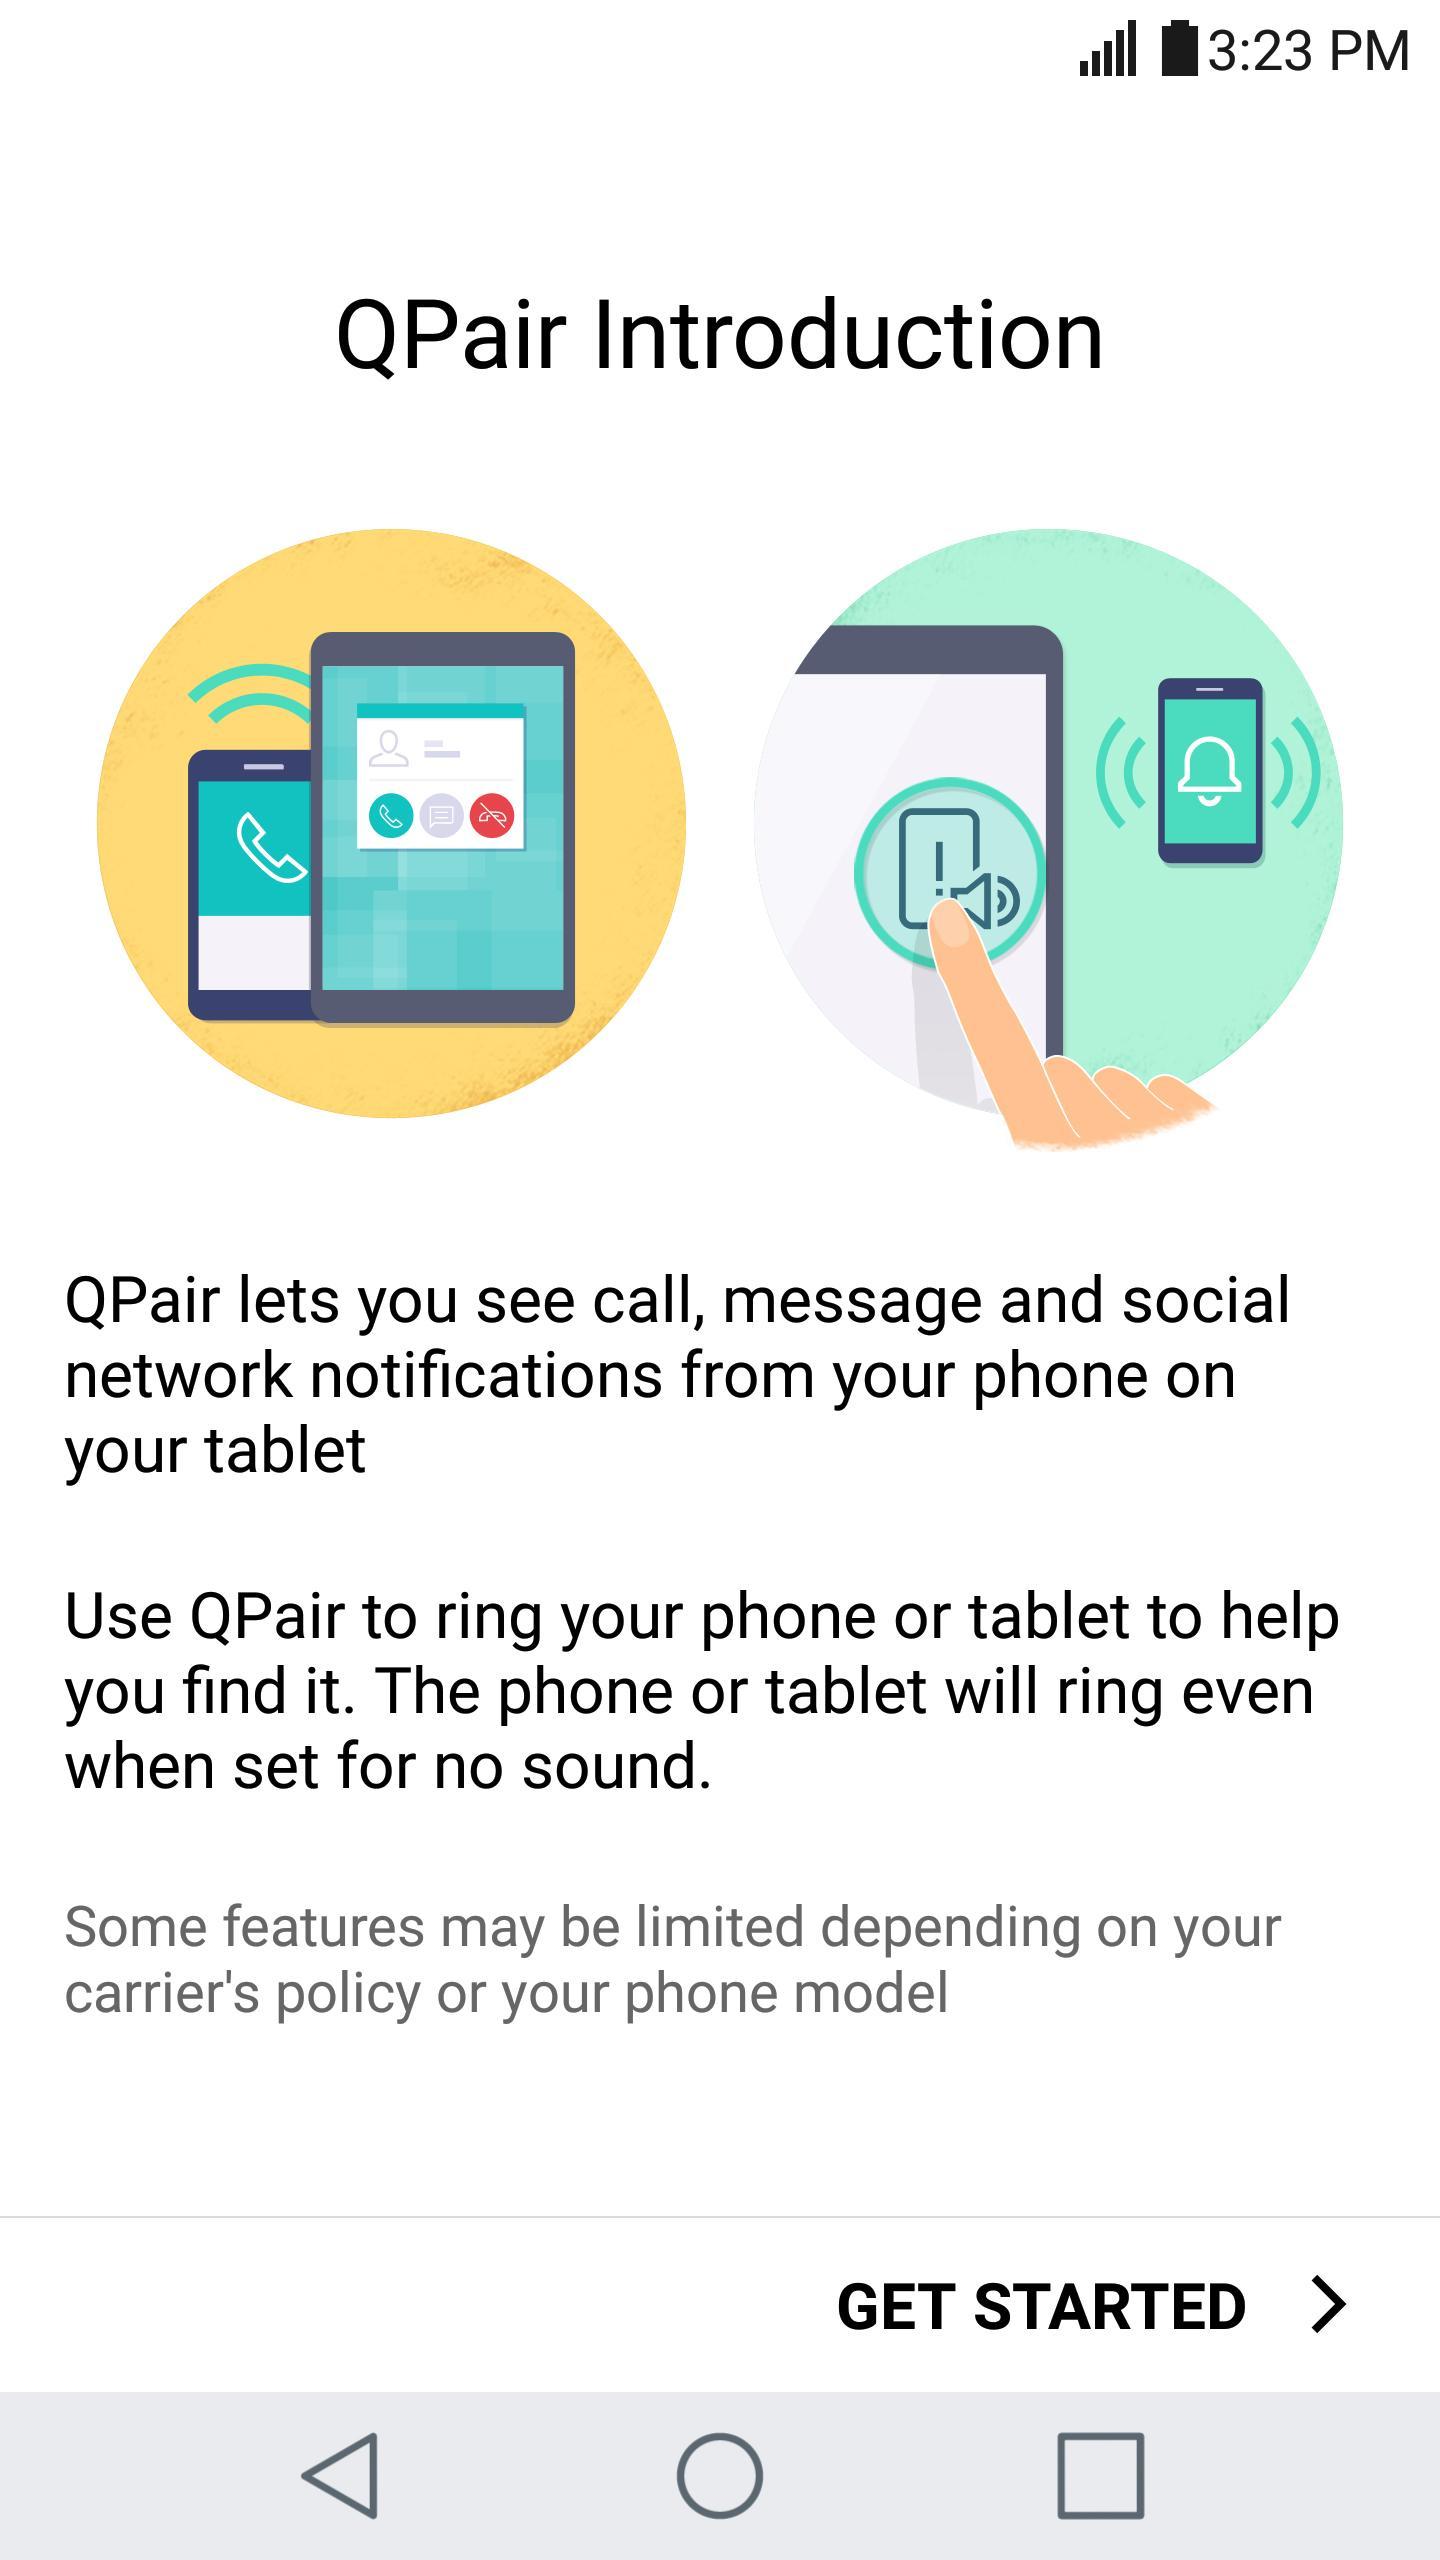 LG QPair for Android - APK Download